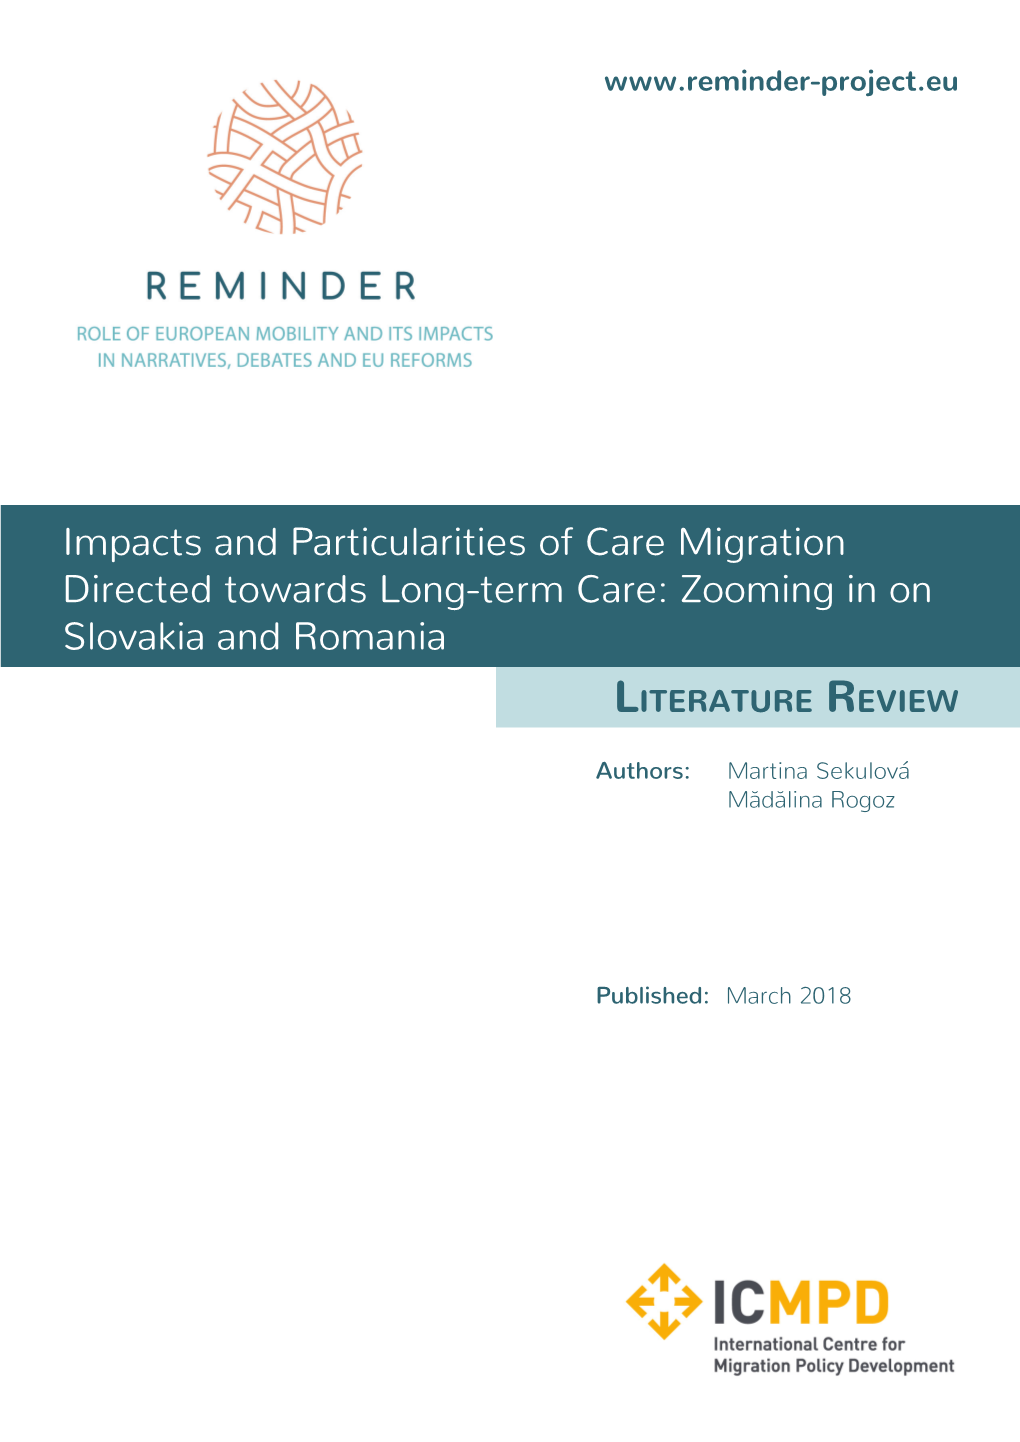 Impacts and Particularities of Care Migration Directed Towards Long-Term Care: Zooming in on Slovakia and Romania Literature Review